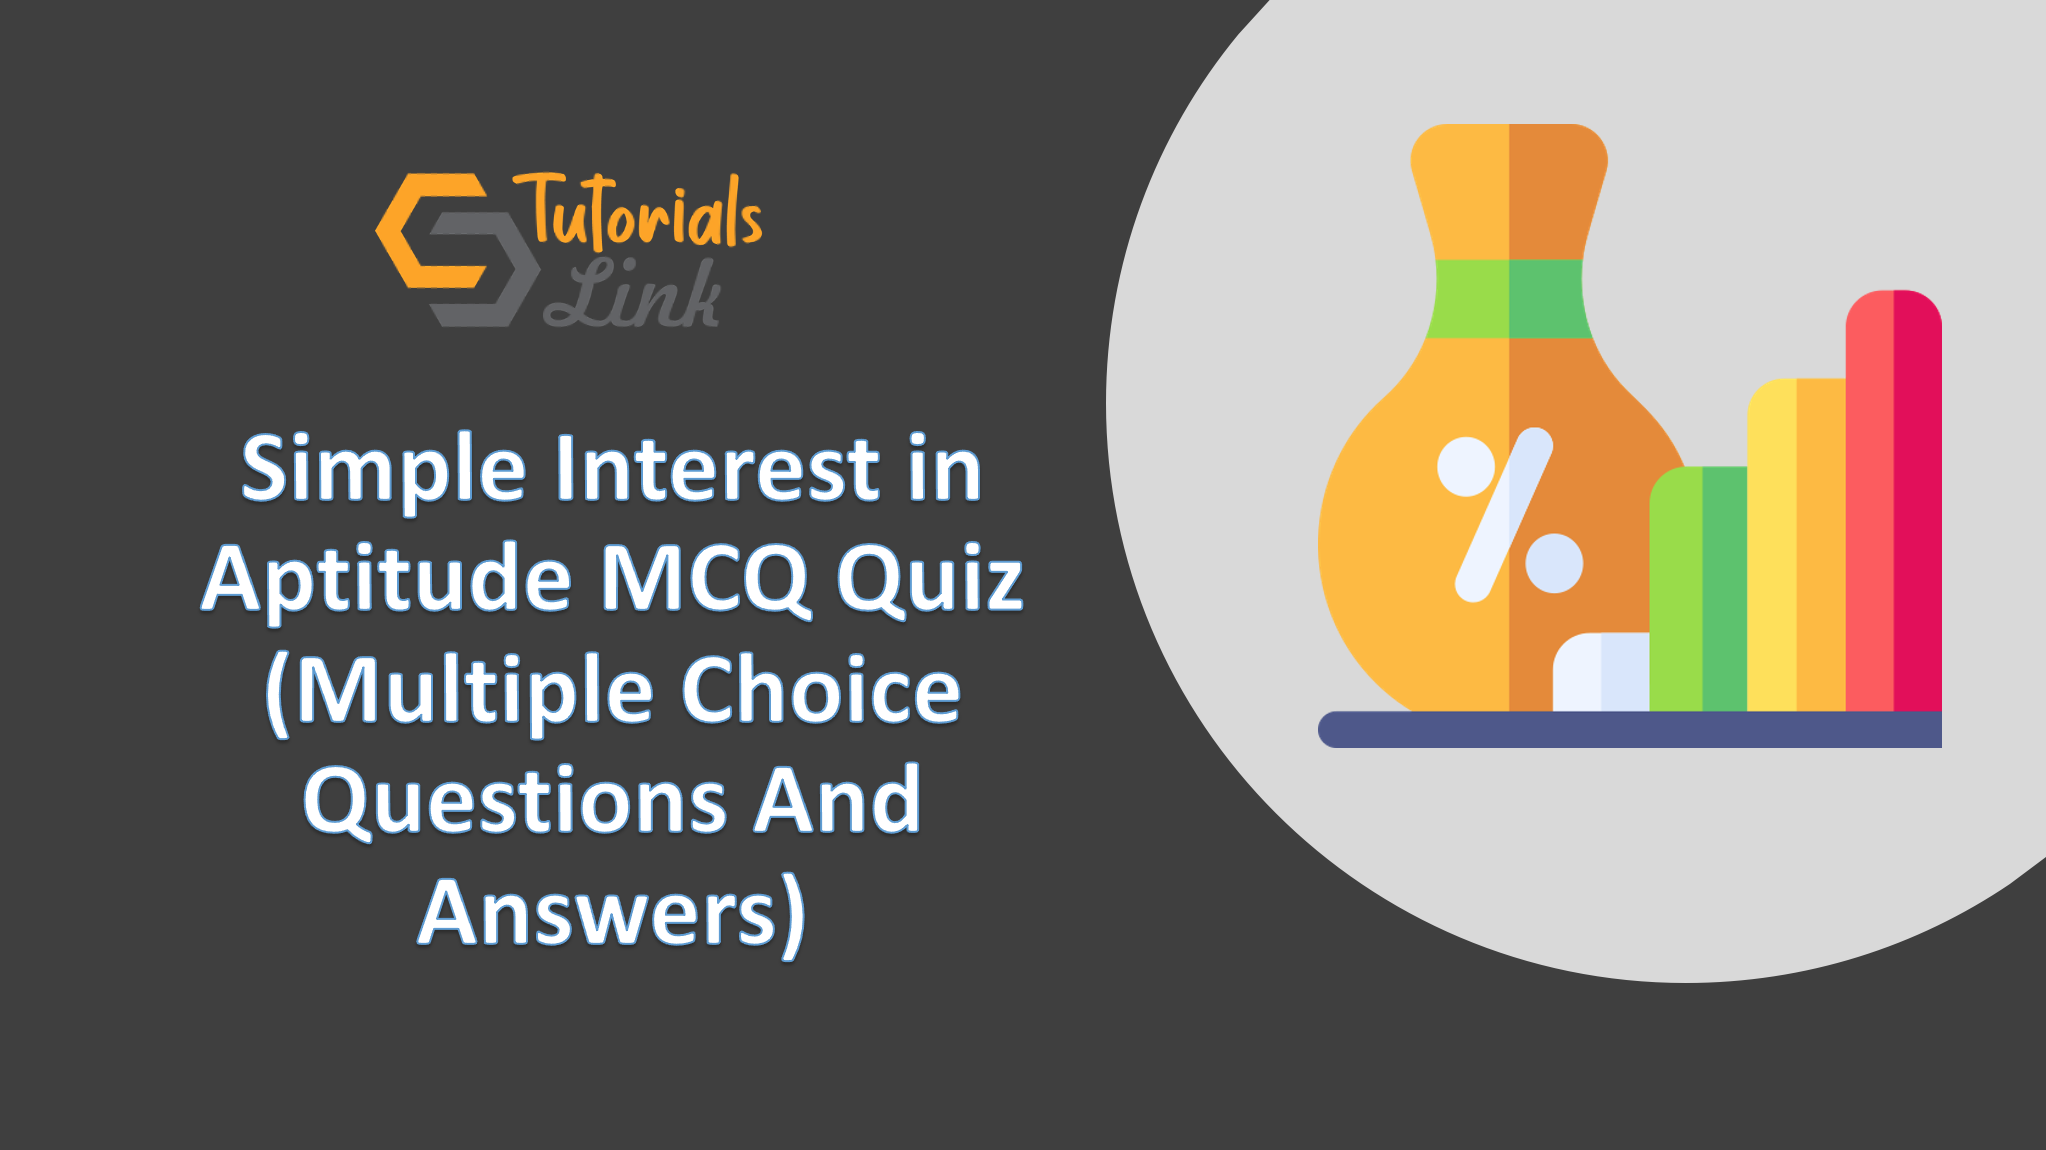 simple-interest-in-aptitude-mcq-quiz-multiple-choice-questions-and-answers-tutorials-link